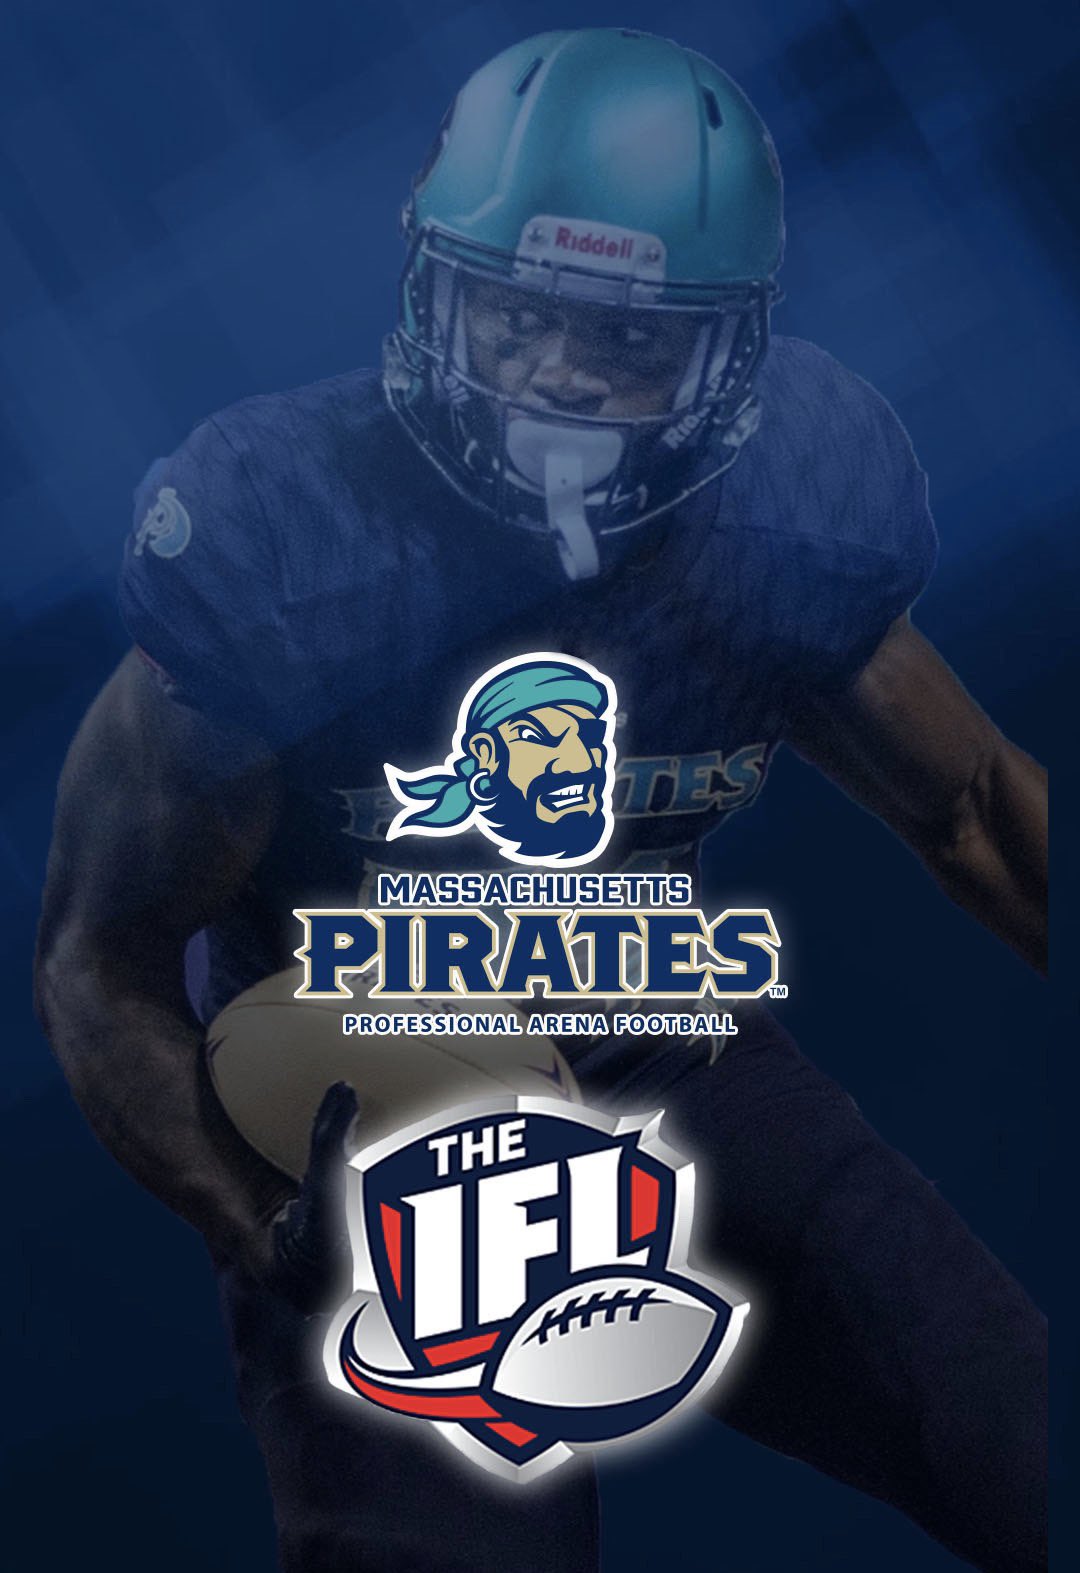 Indoor Football League on Twitter: The Indoor Football League welcomes  @mass_pirates as it's newest team.  / X